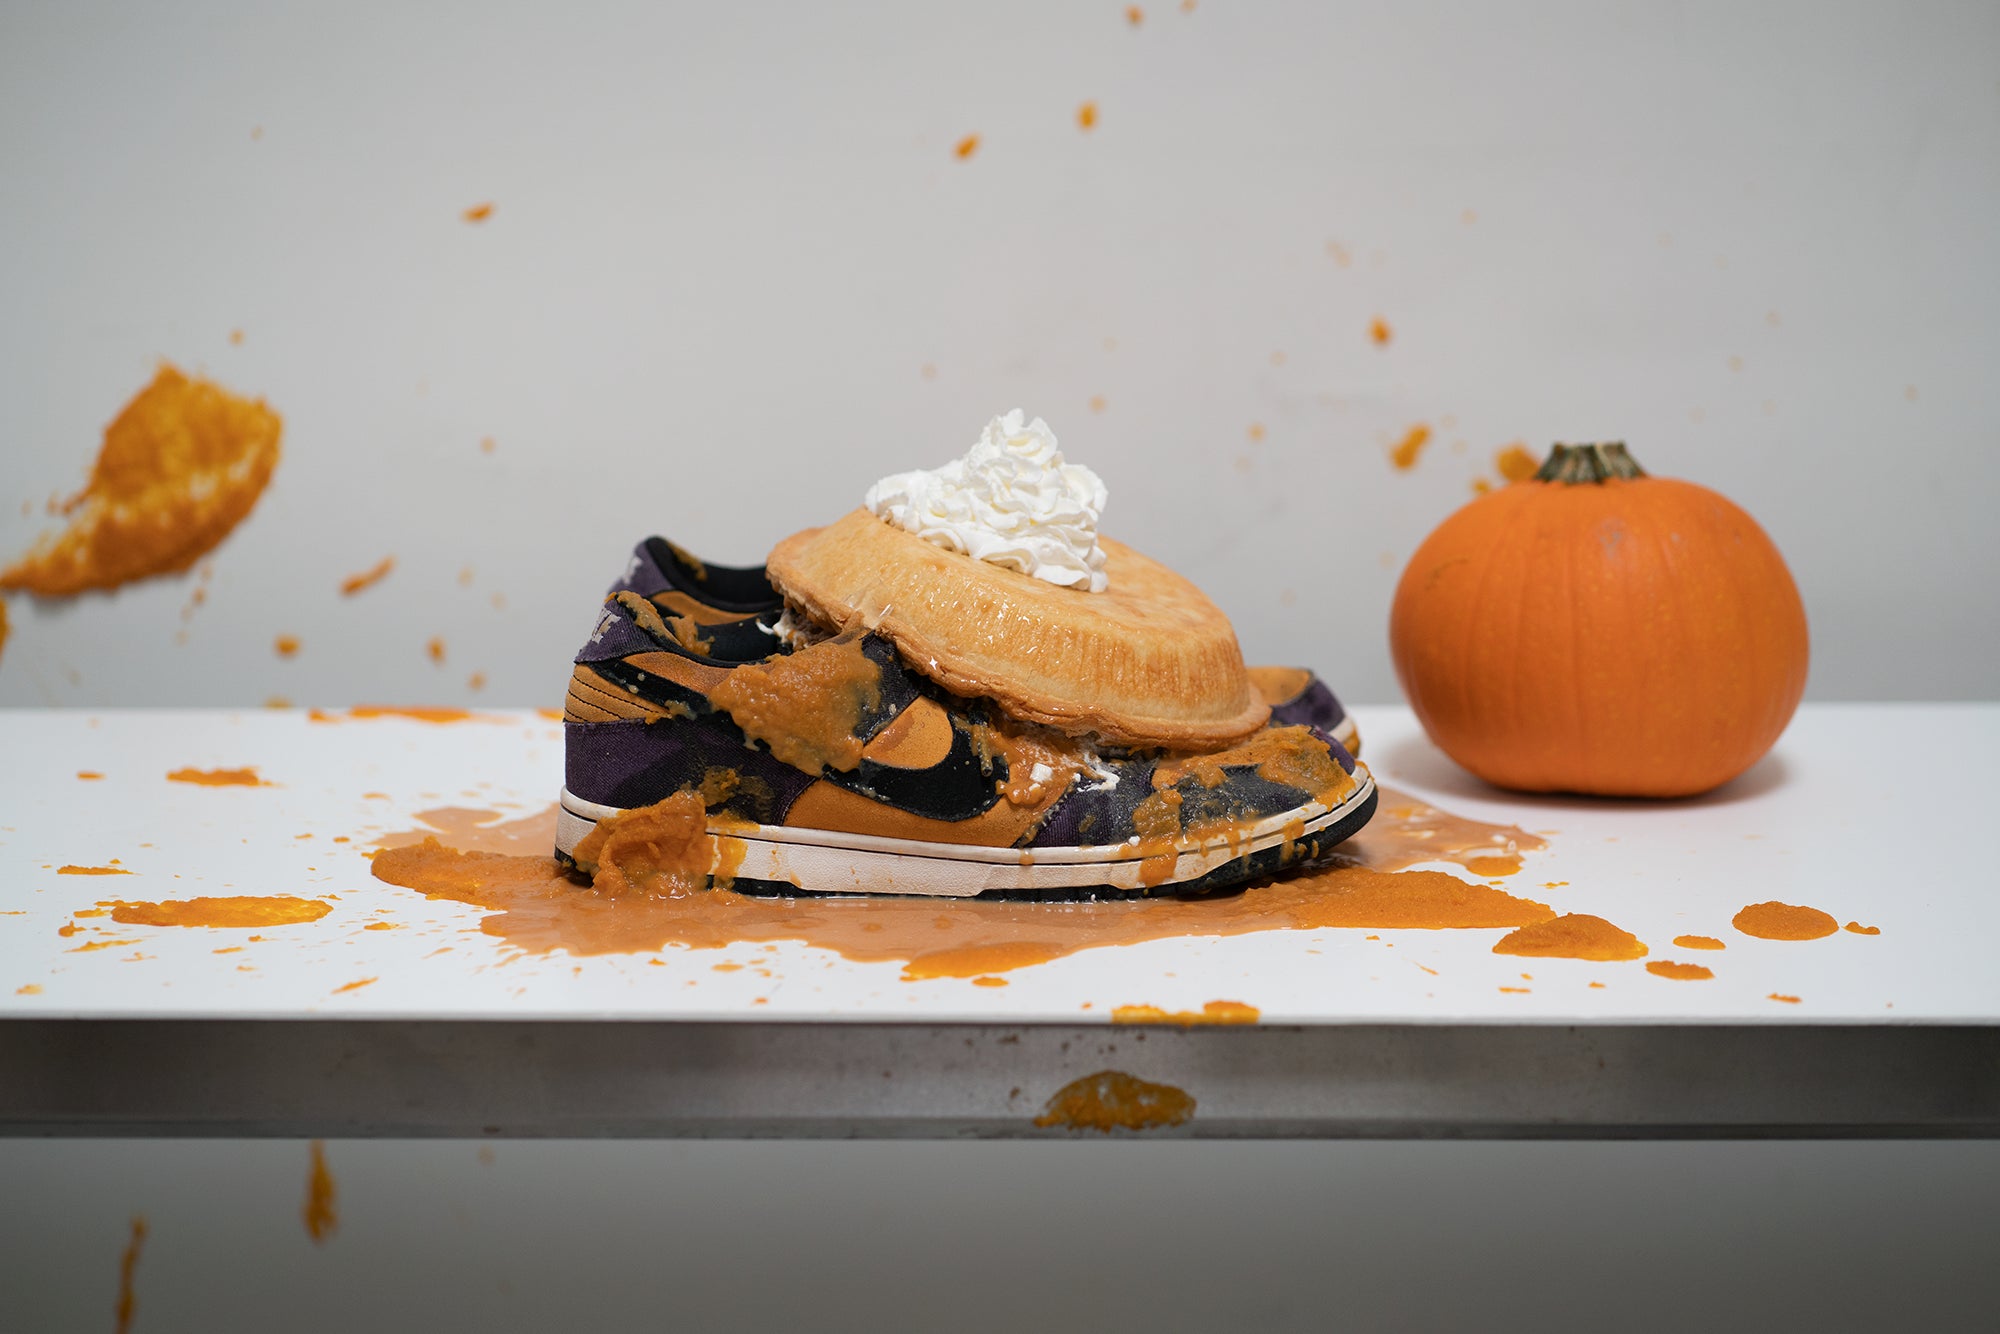 How to Clean Pumpkin off your sneakers